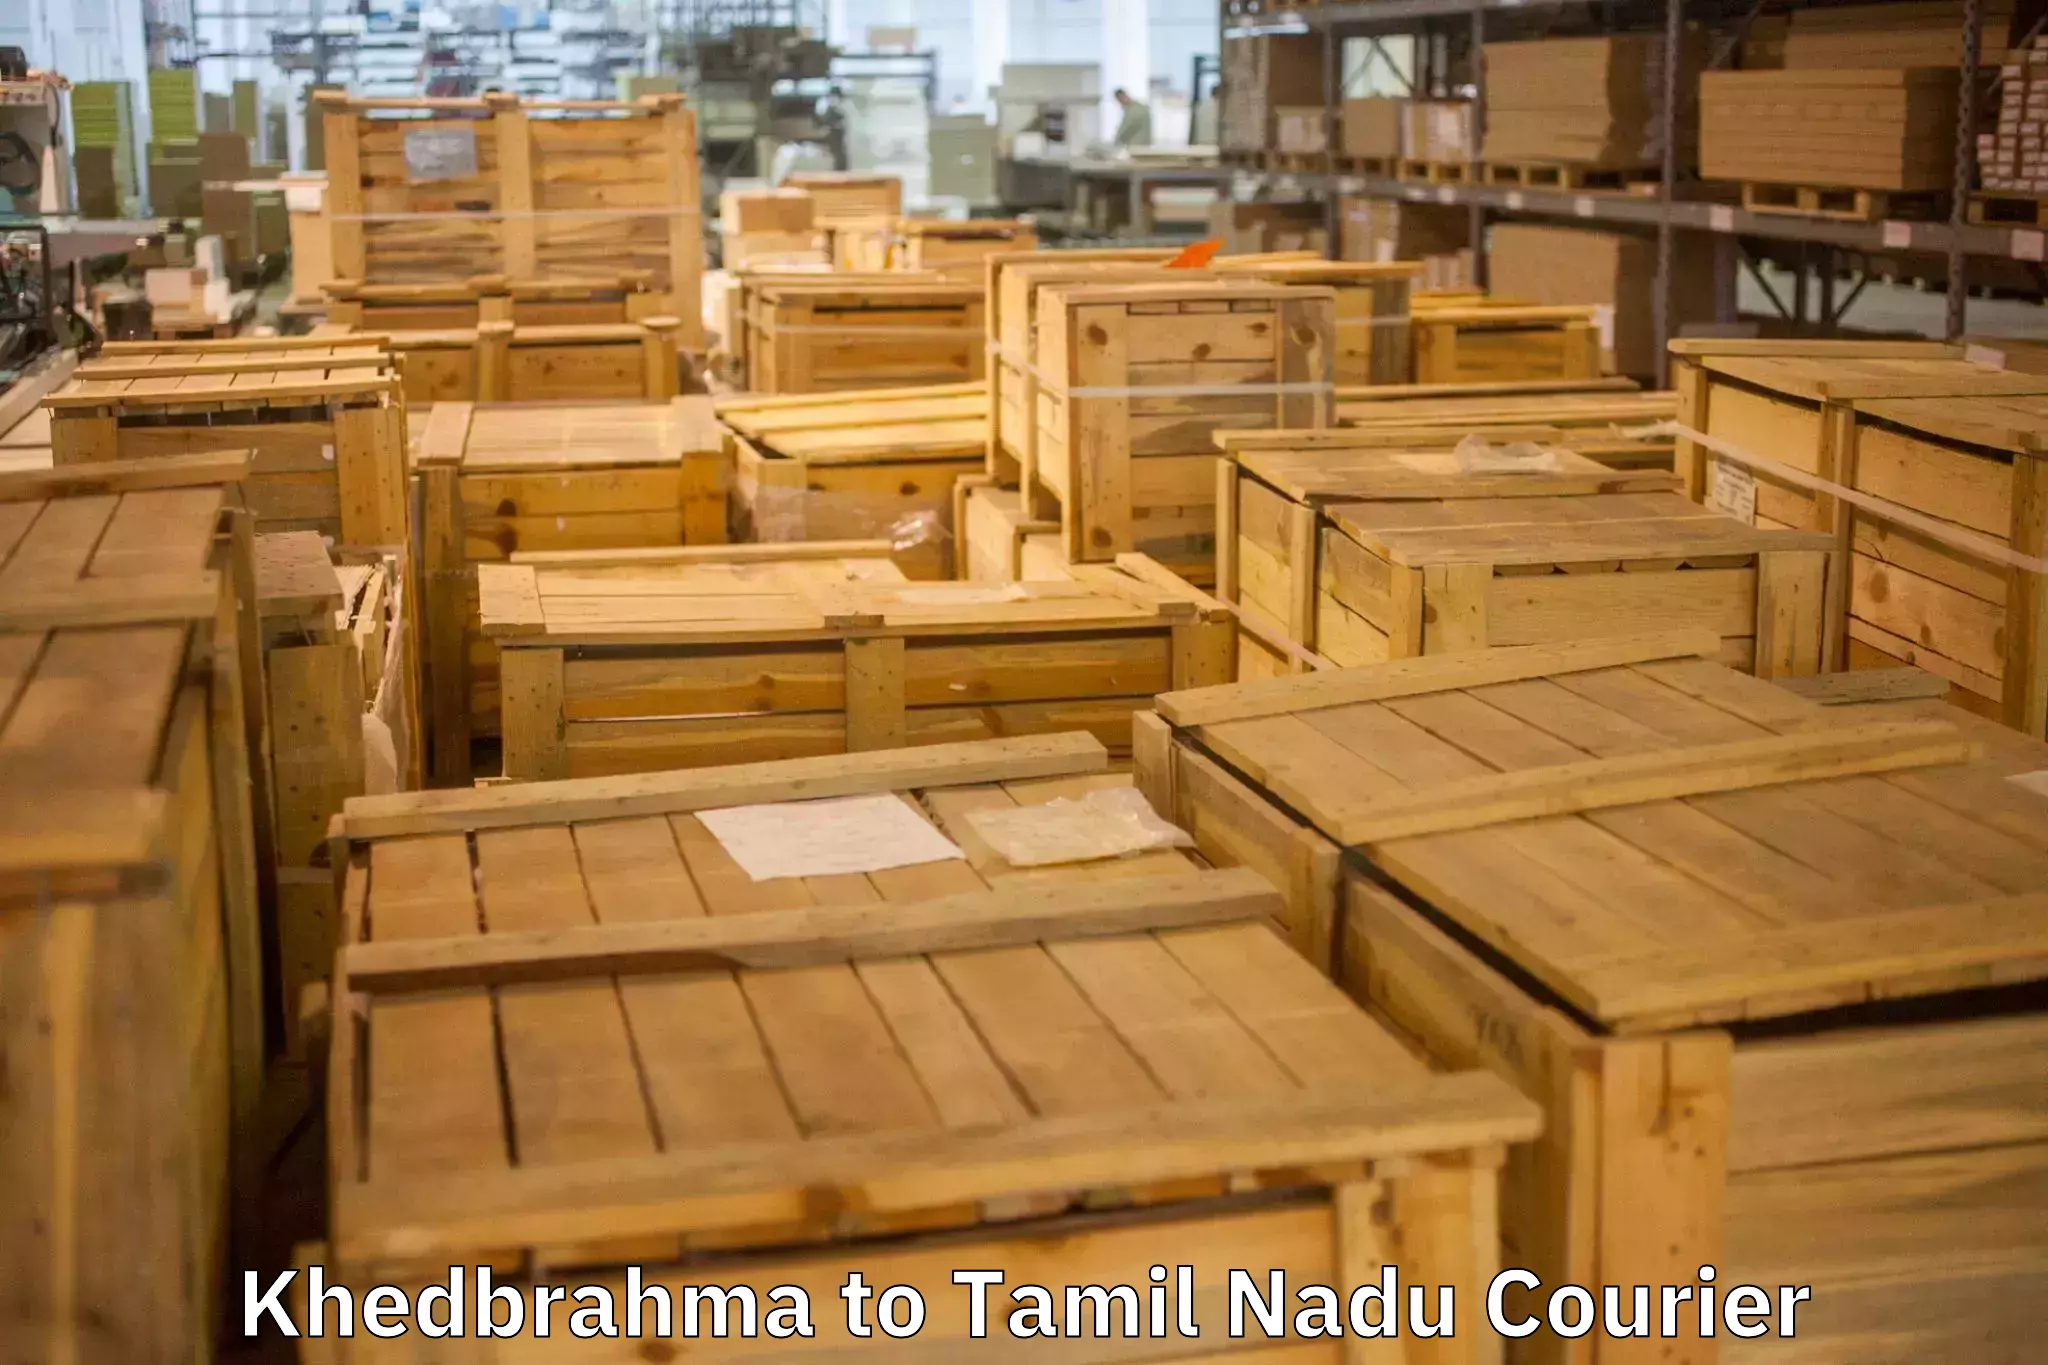 Nationwide furniture transport Khedbrahma to Meenakshi Academy of Higher Education and Research Chennai